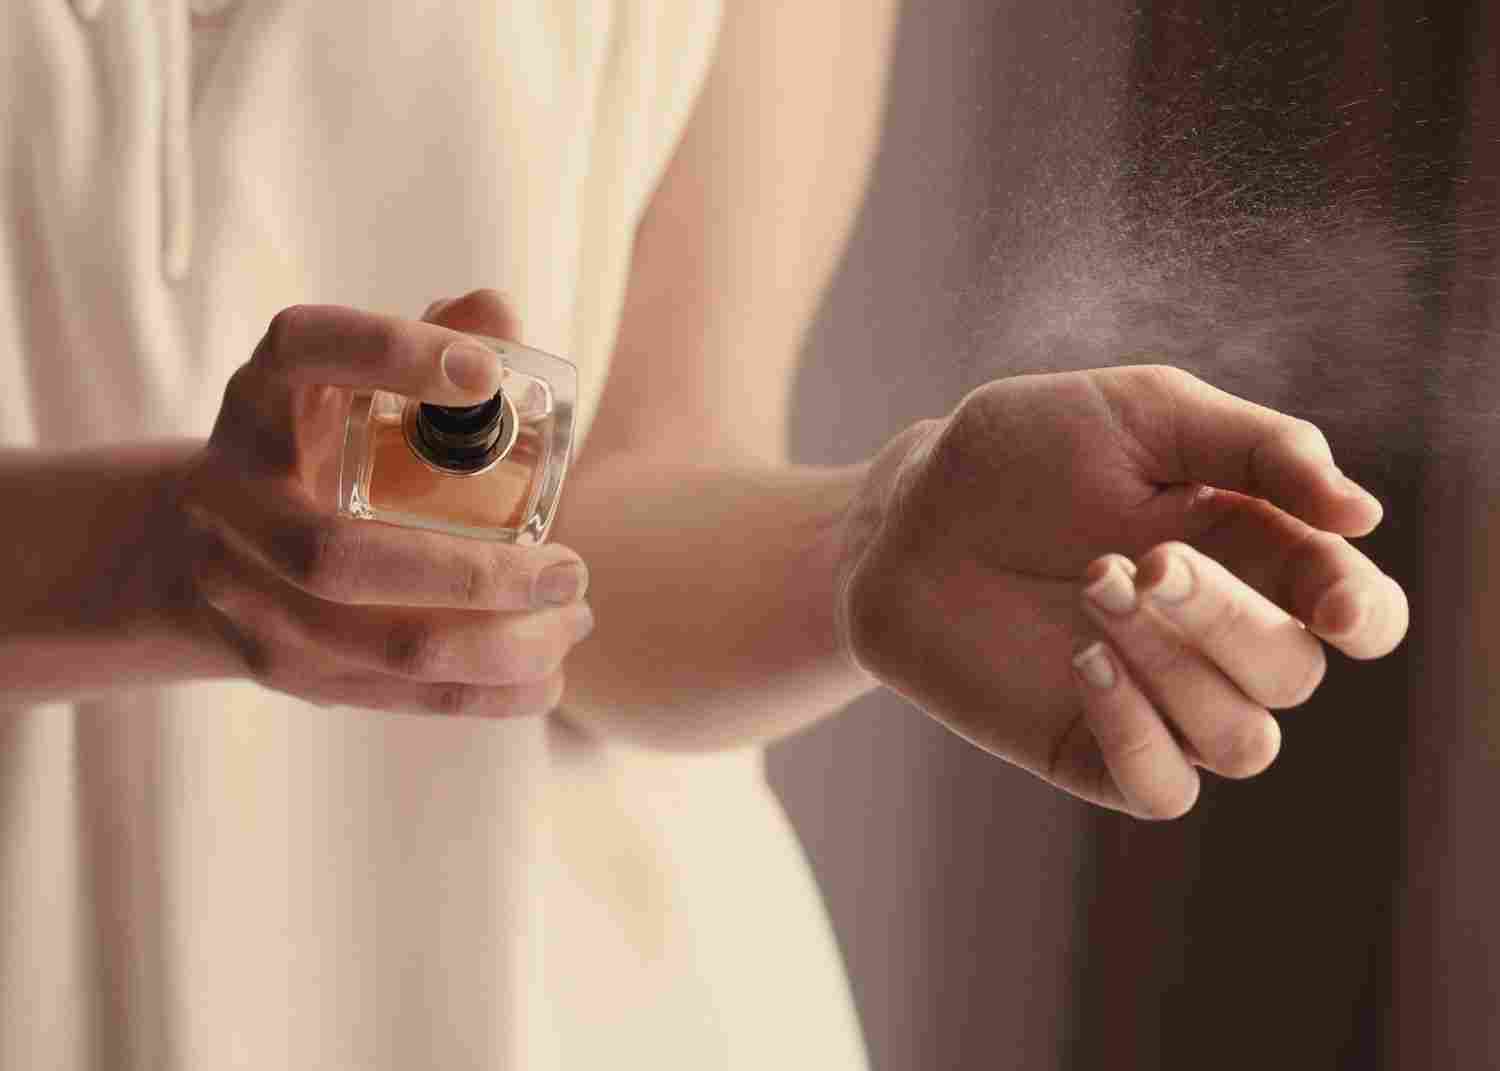 Body Sprays vs. Perfumes: What’s the Difference?